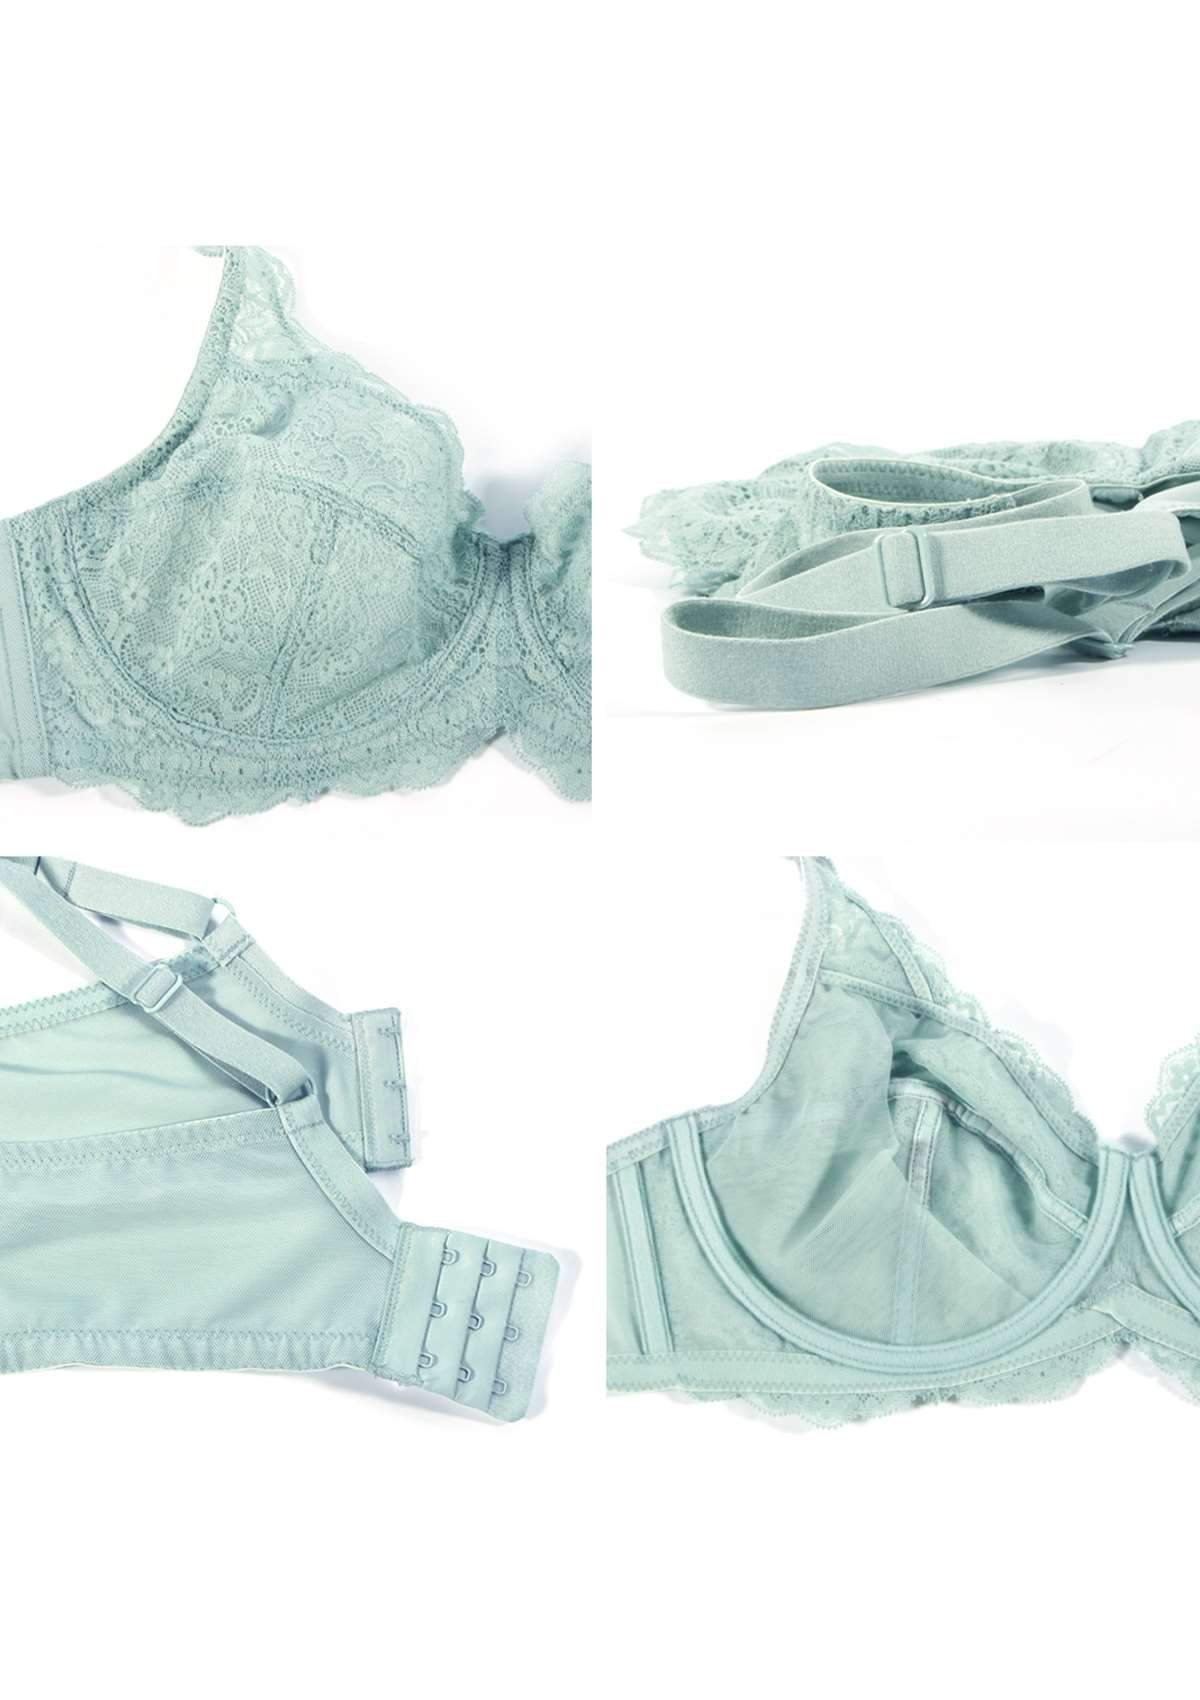 HSIA All-Over Floral Lace: Best Bra For Elderly With Sagging Breasts - Pewter Blue / 40 / D